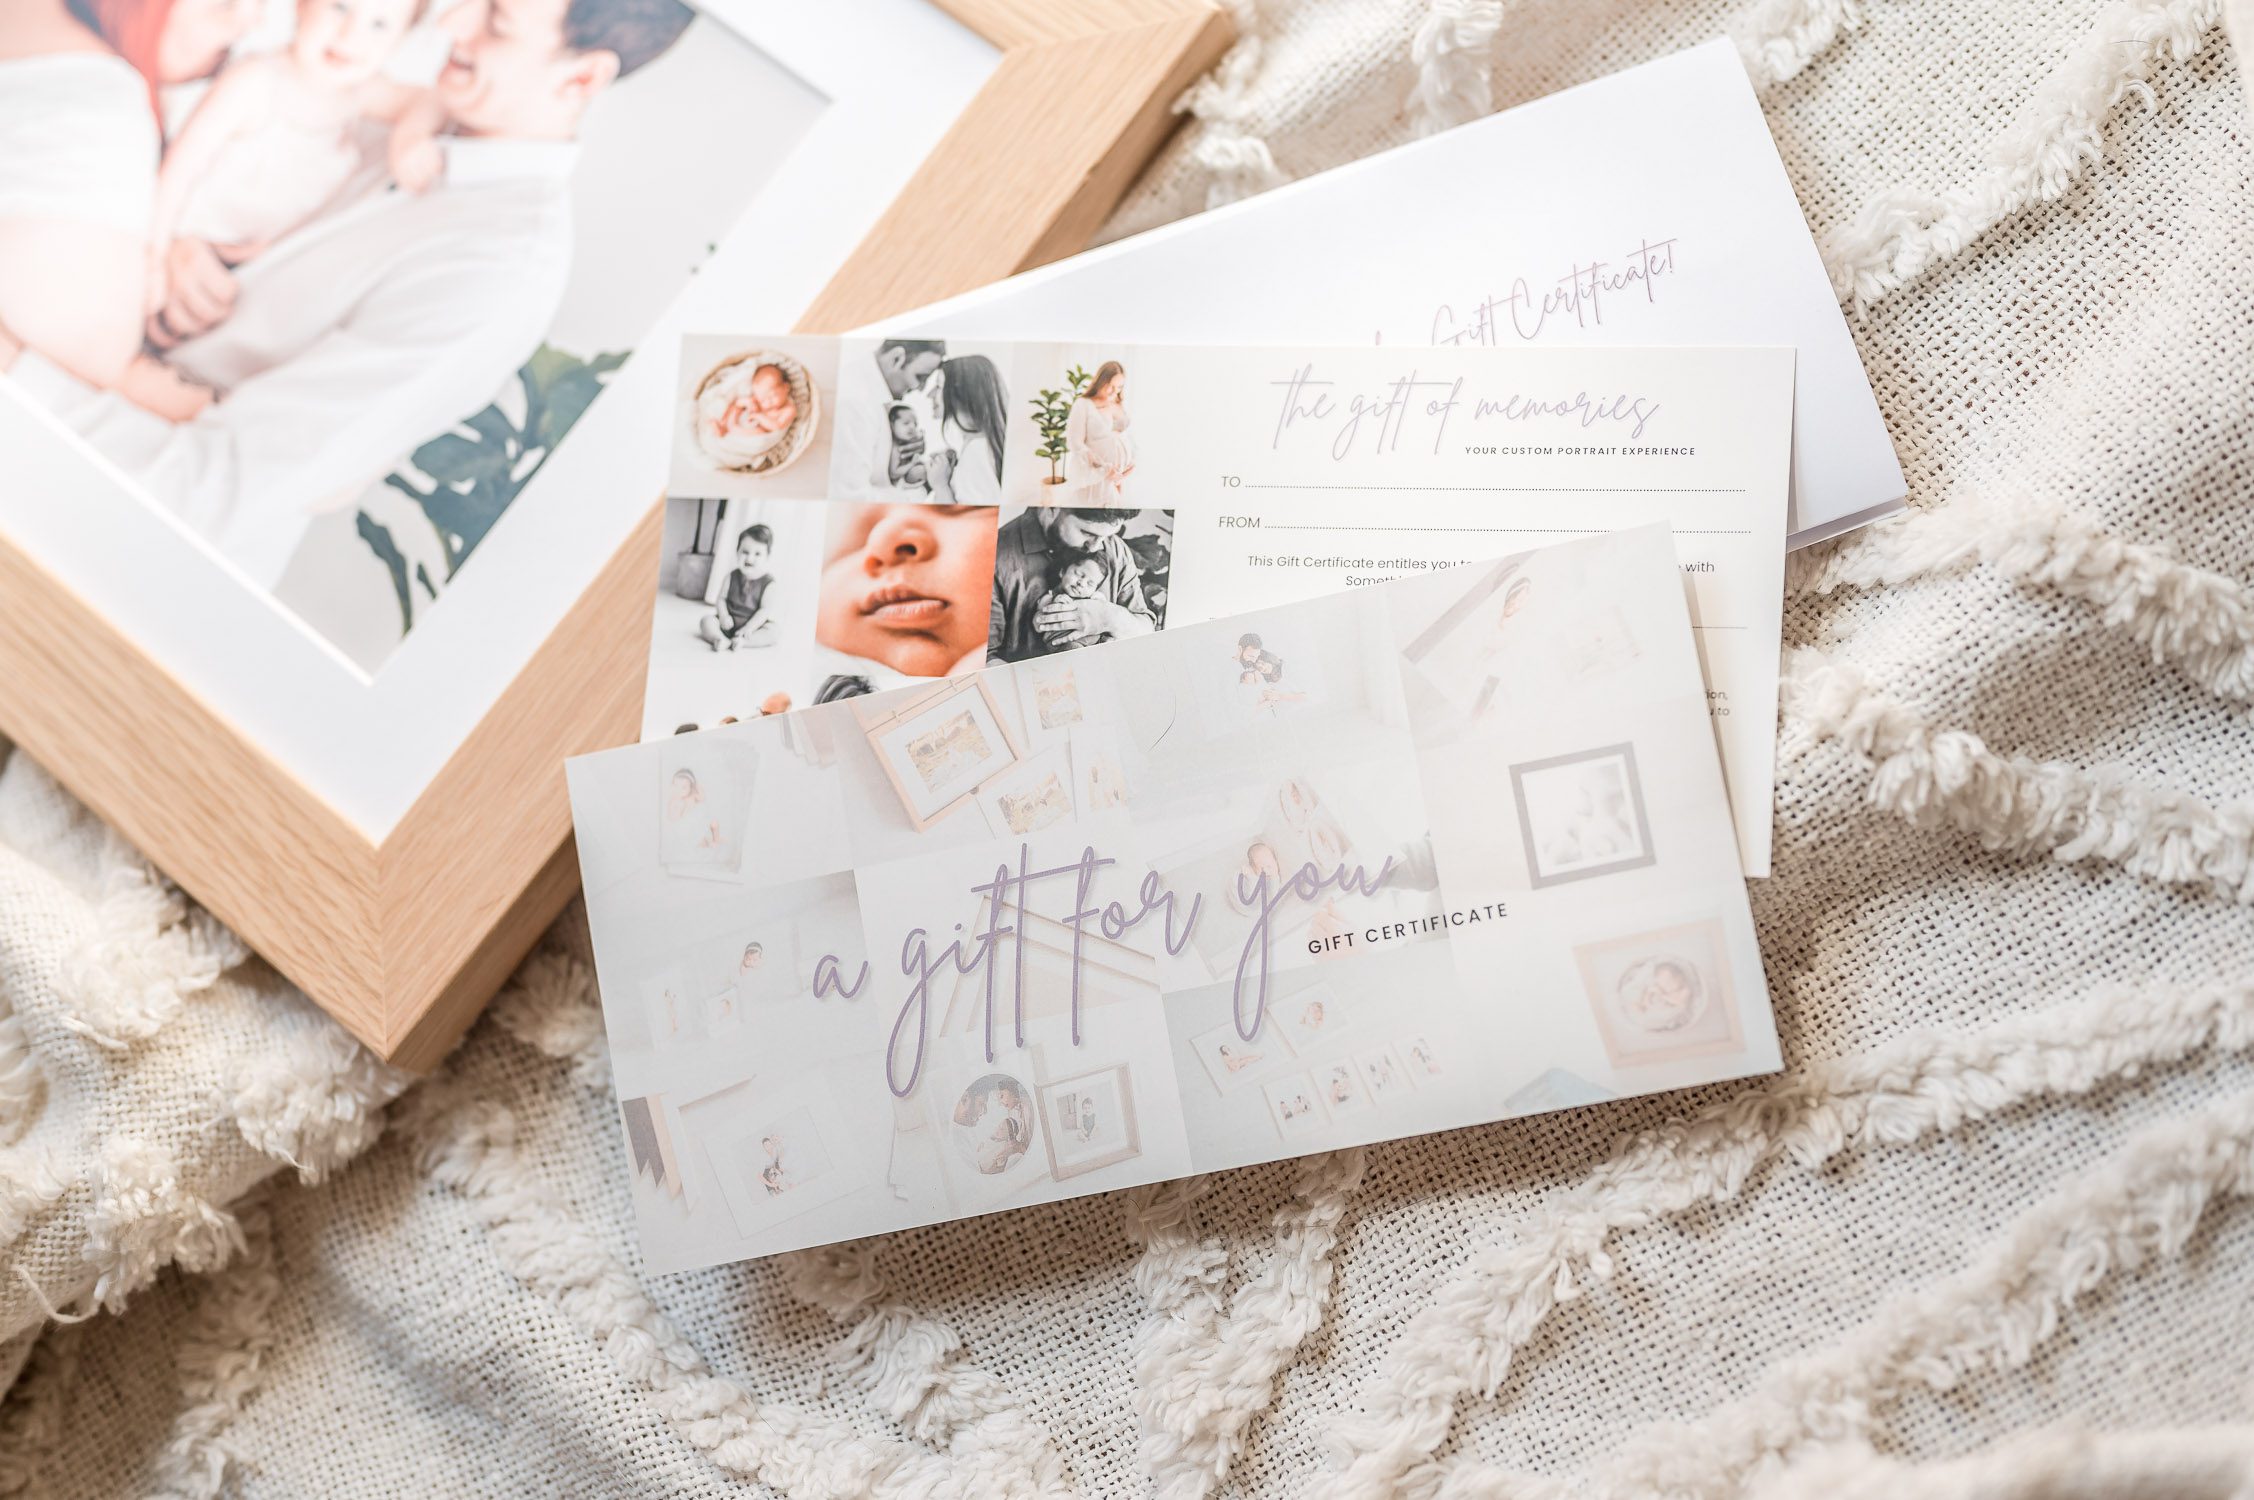 gift certificate for newborn photographer in melbourne